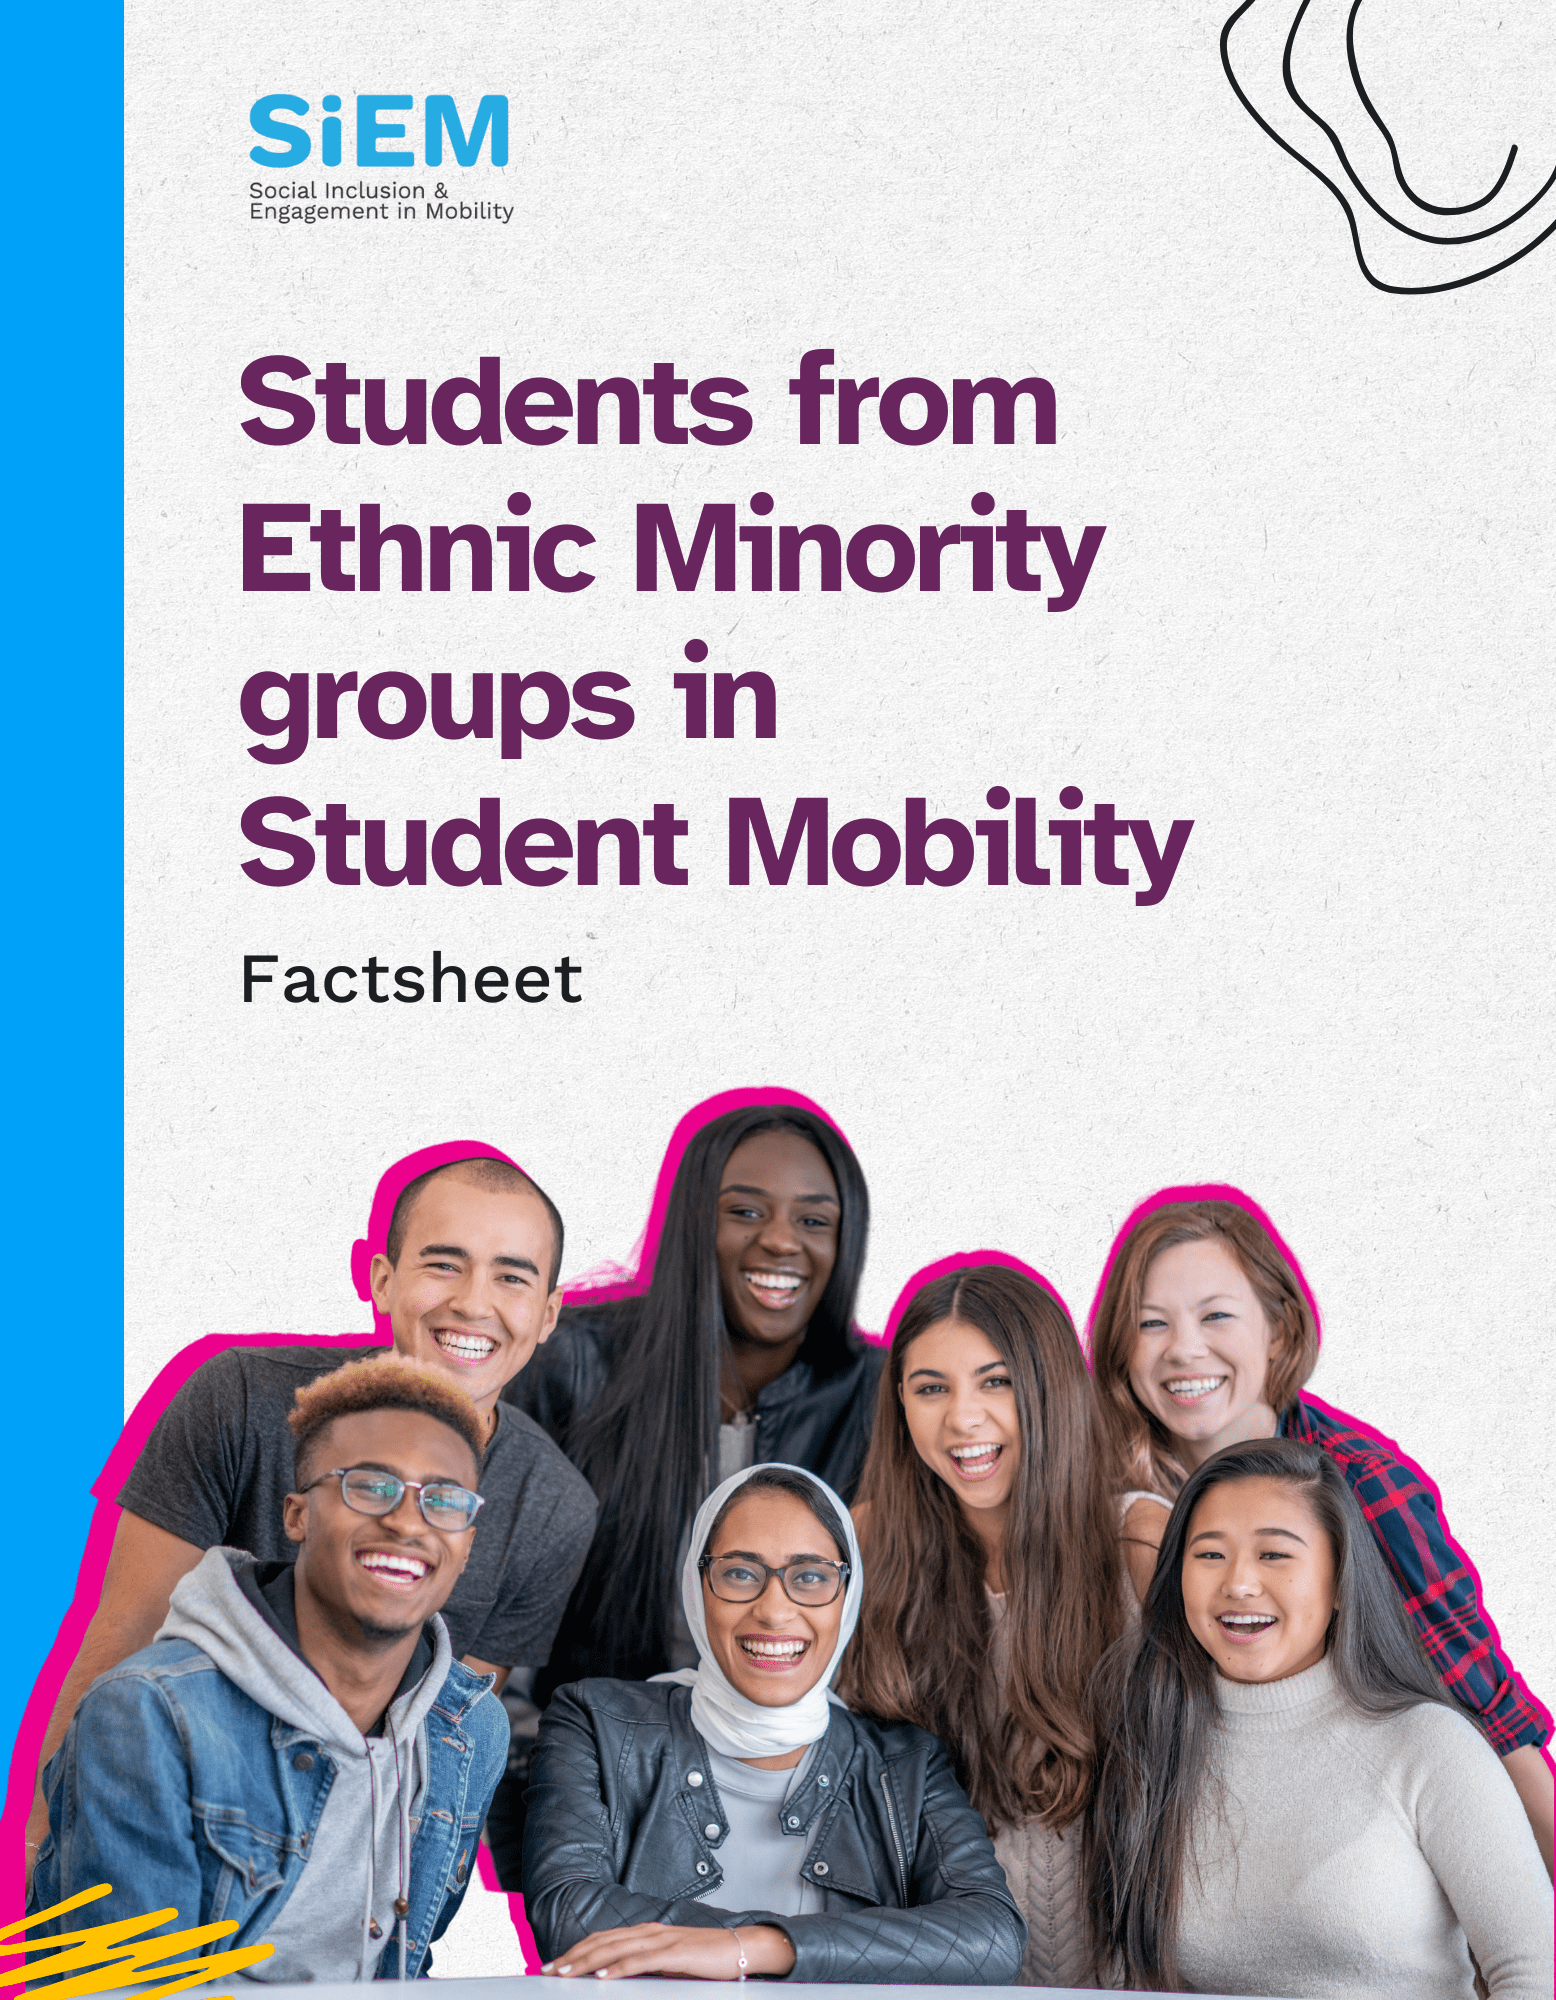 Factsheet - Students from Ethnic Minority groups in Student Mobility